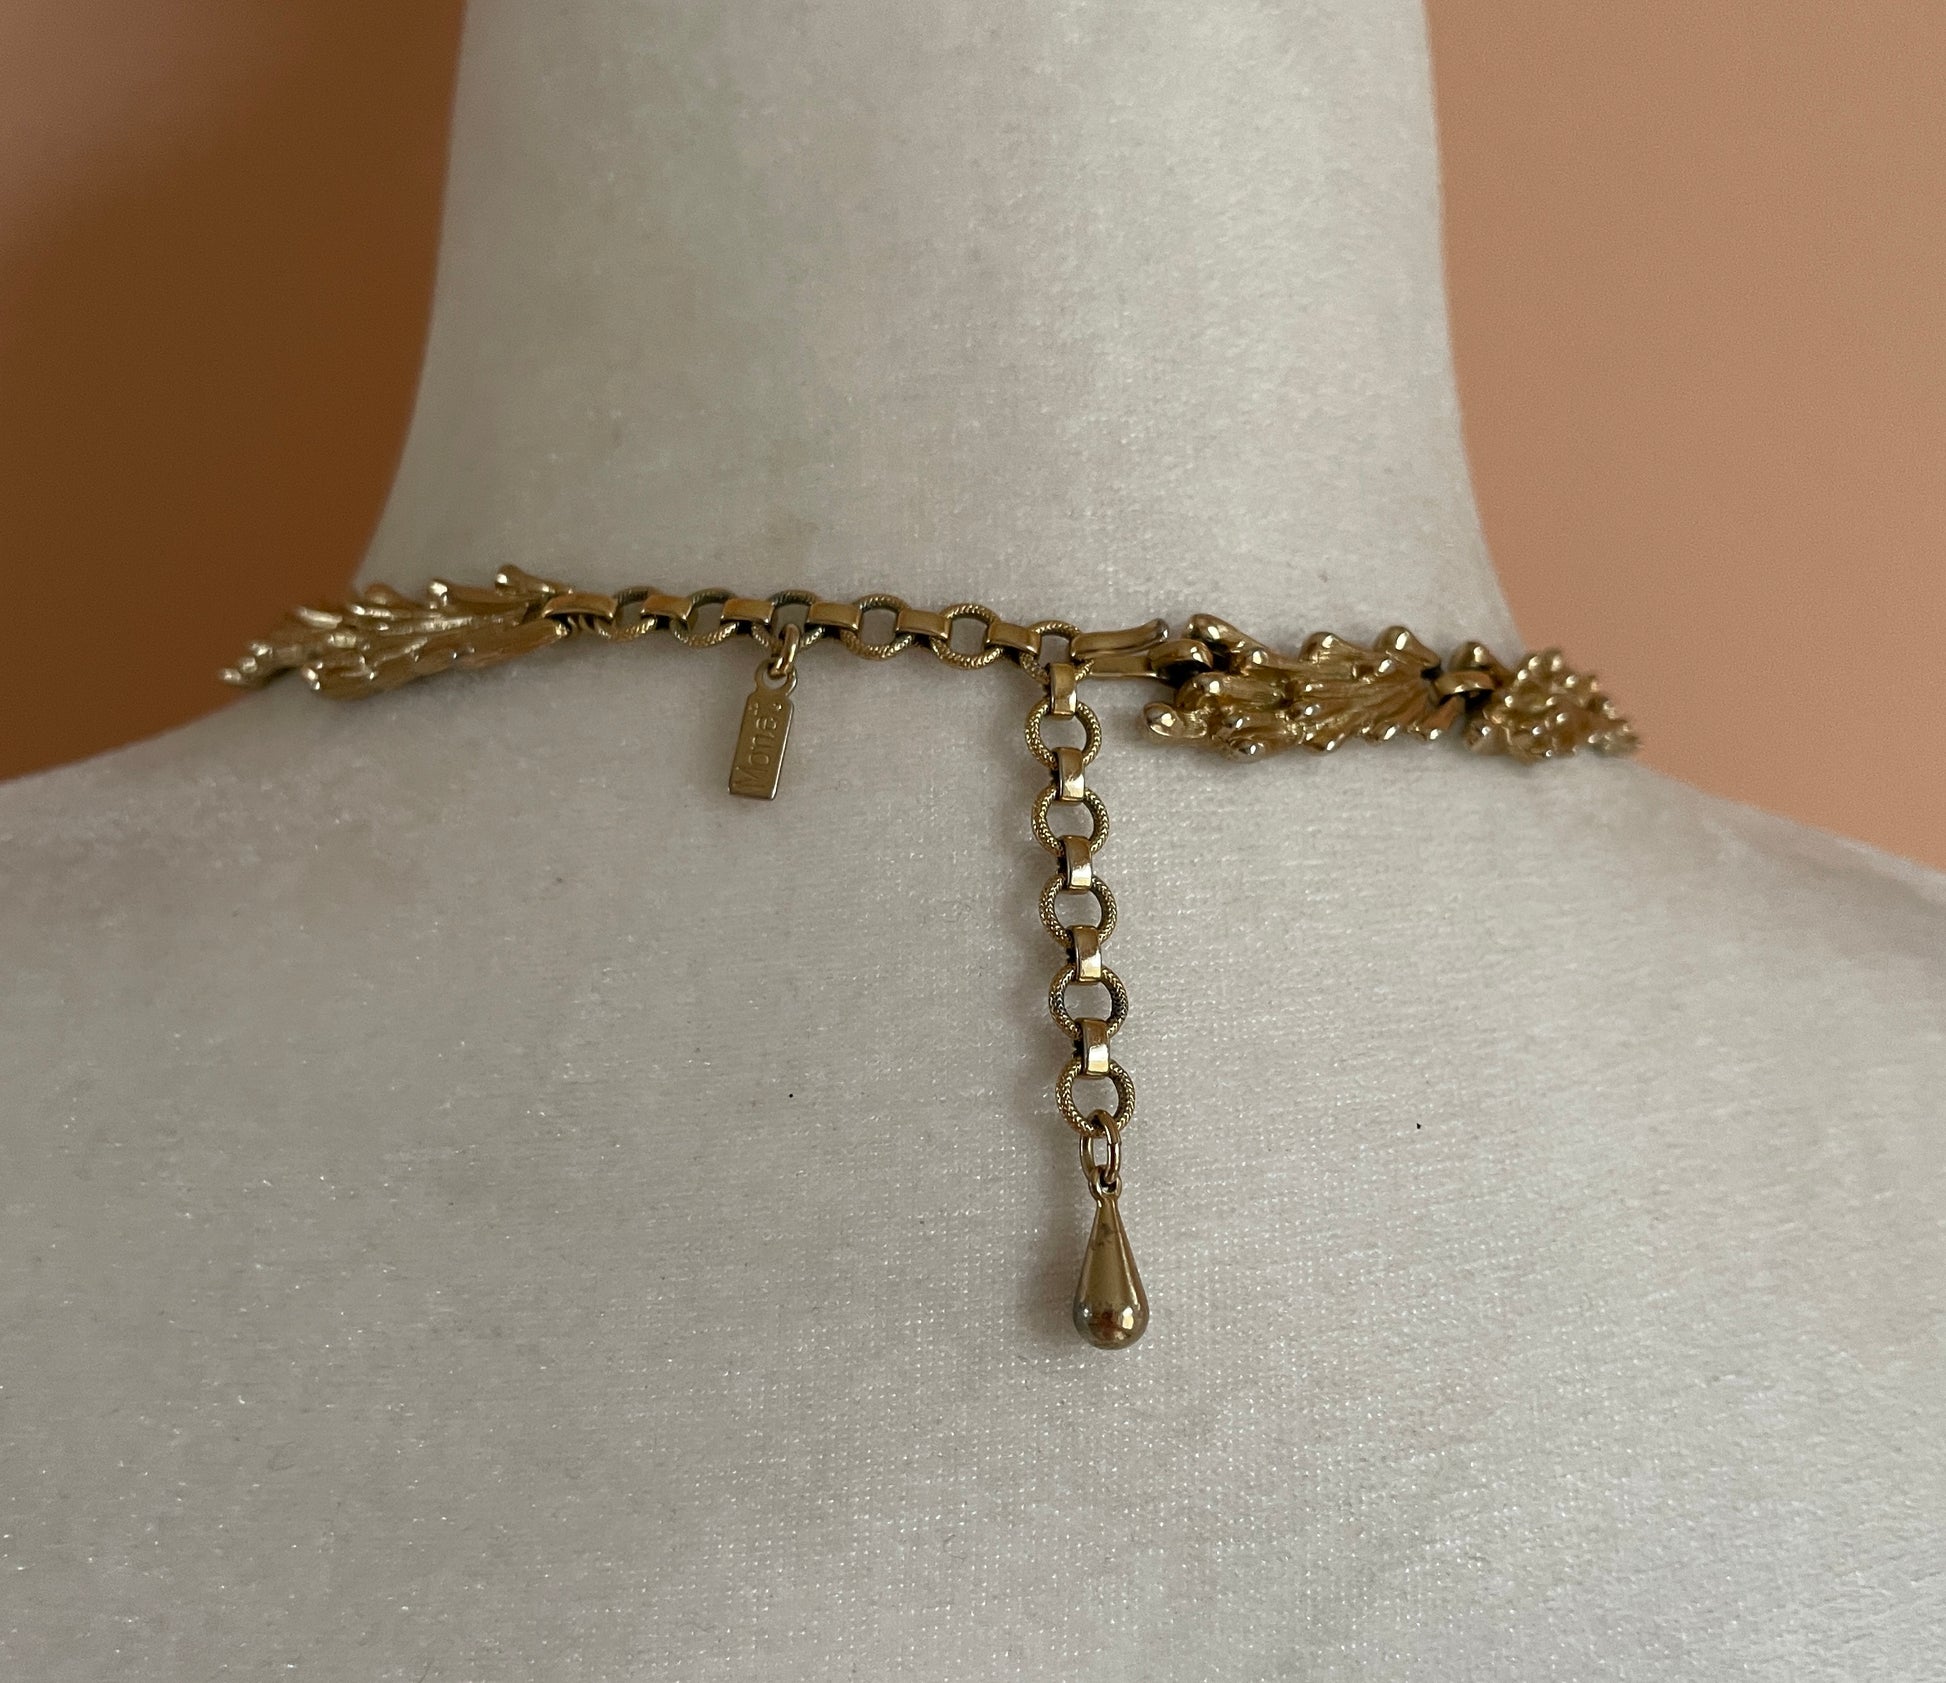  70s Monet Gold Tone Textured Leaf Choker Necklace